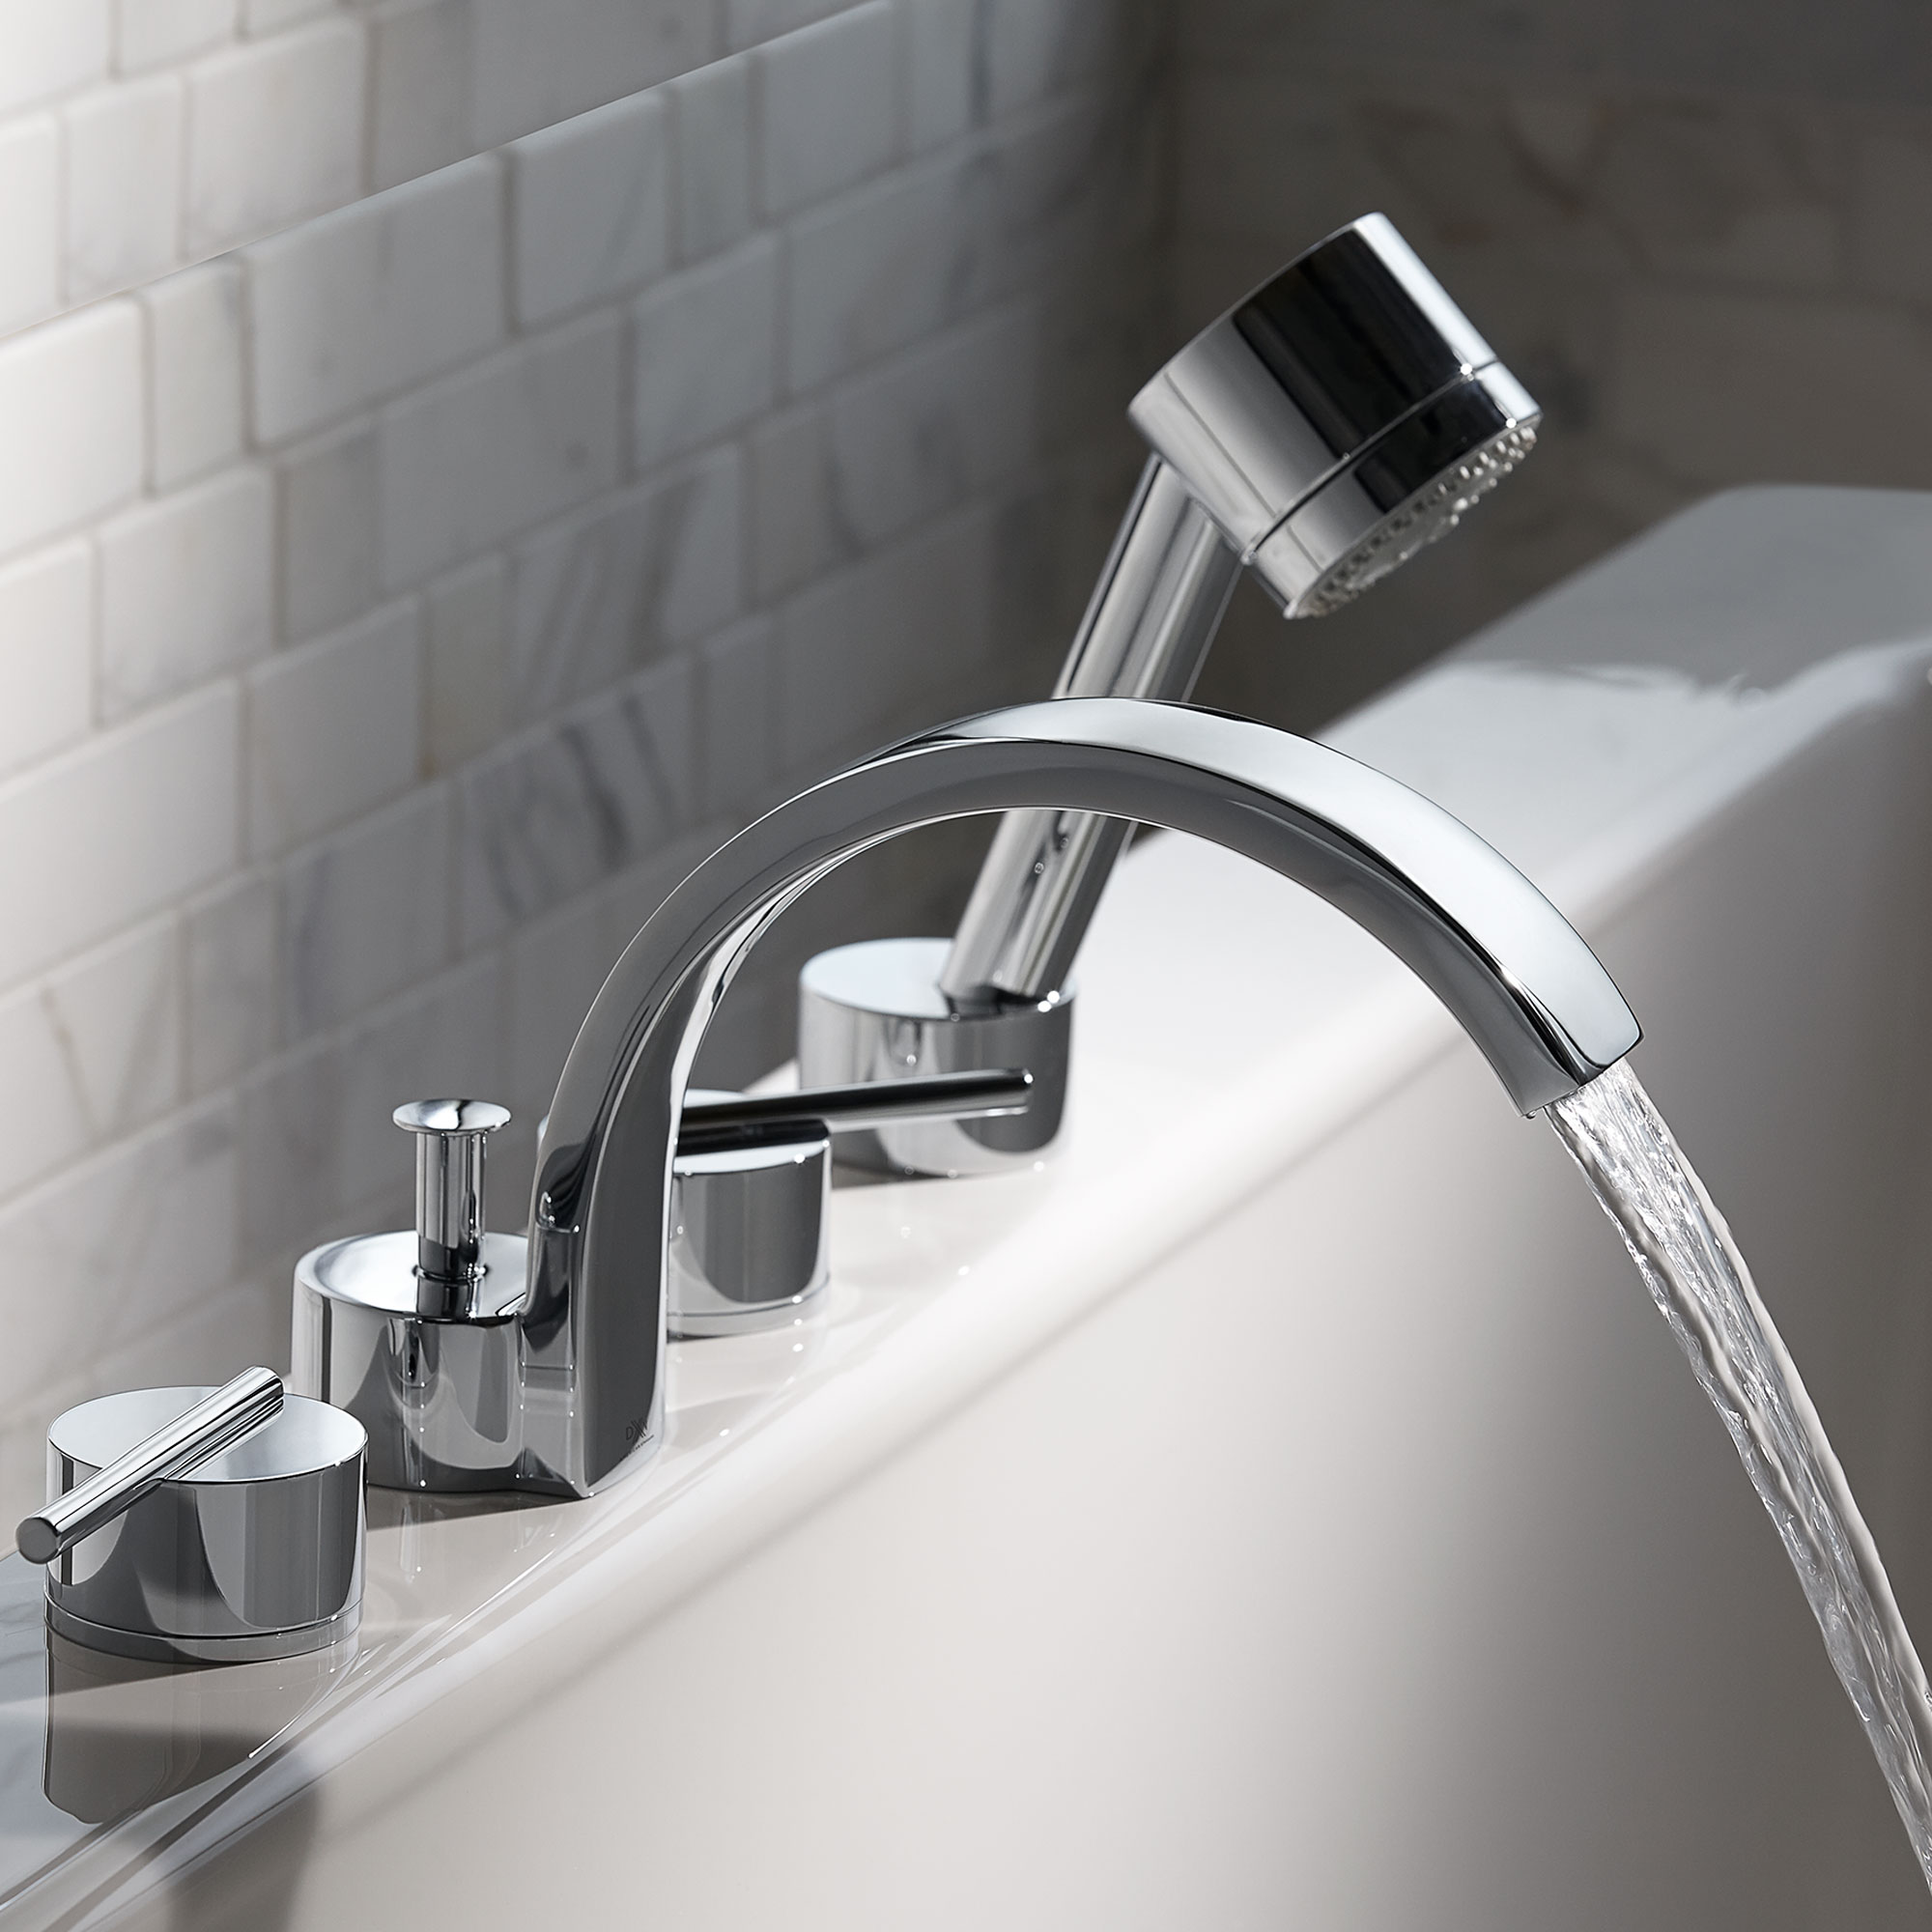 Deck Mount Bathtub Faucet With Hand Shower